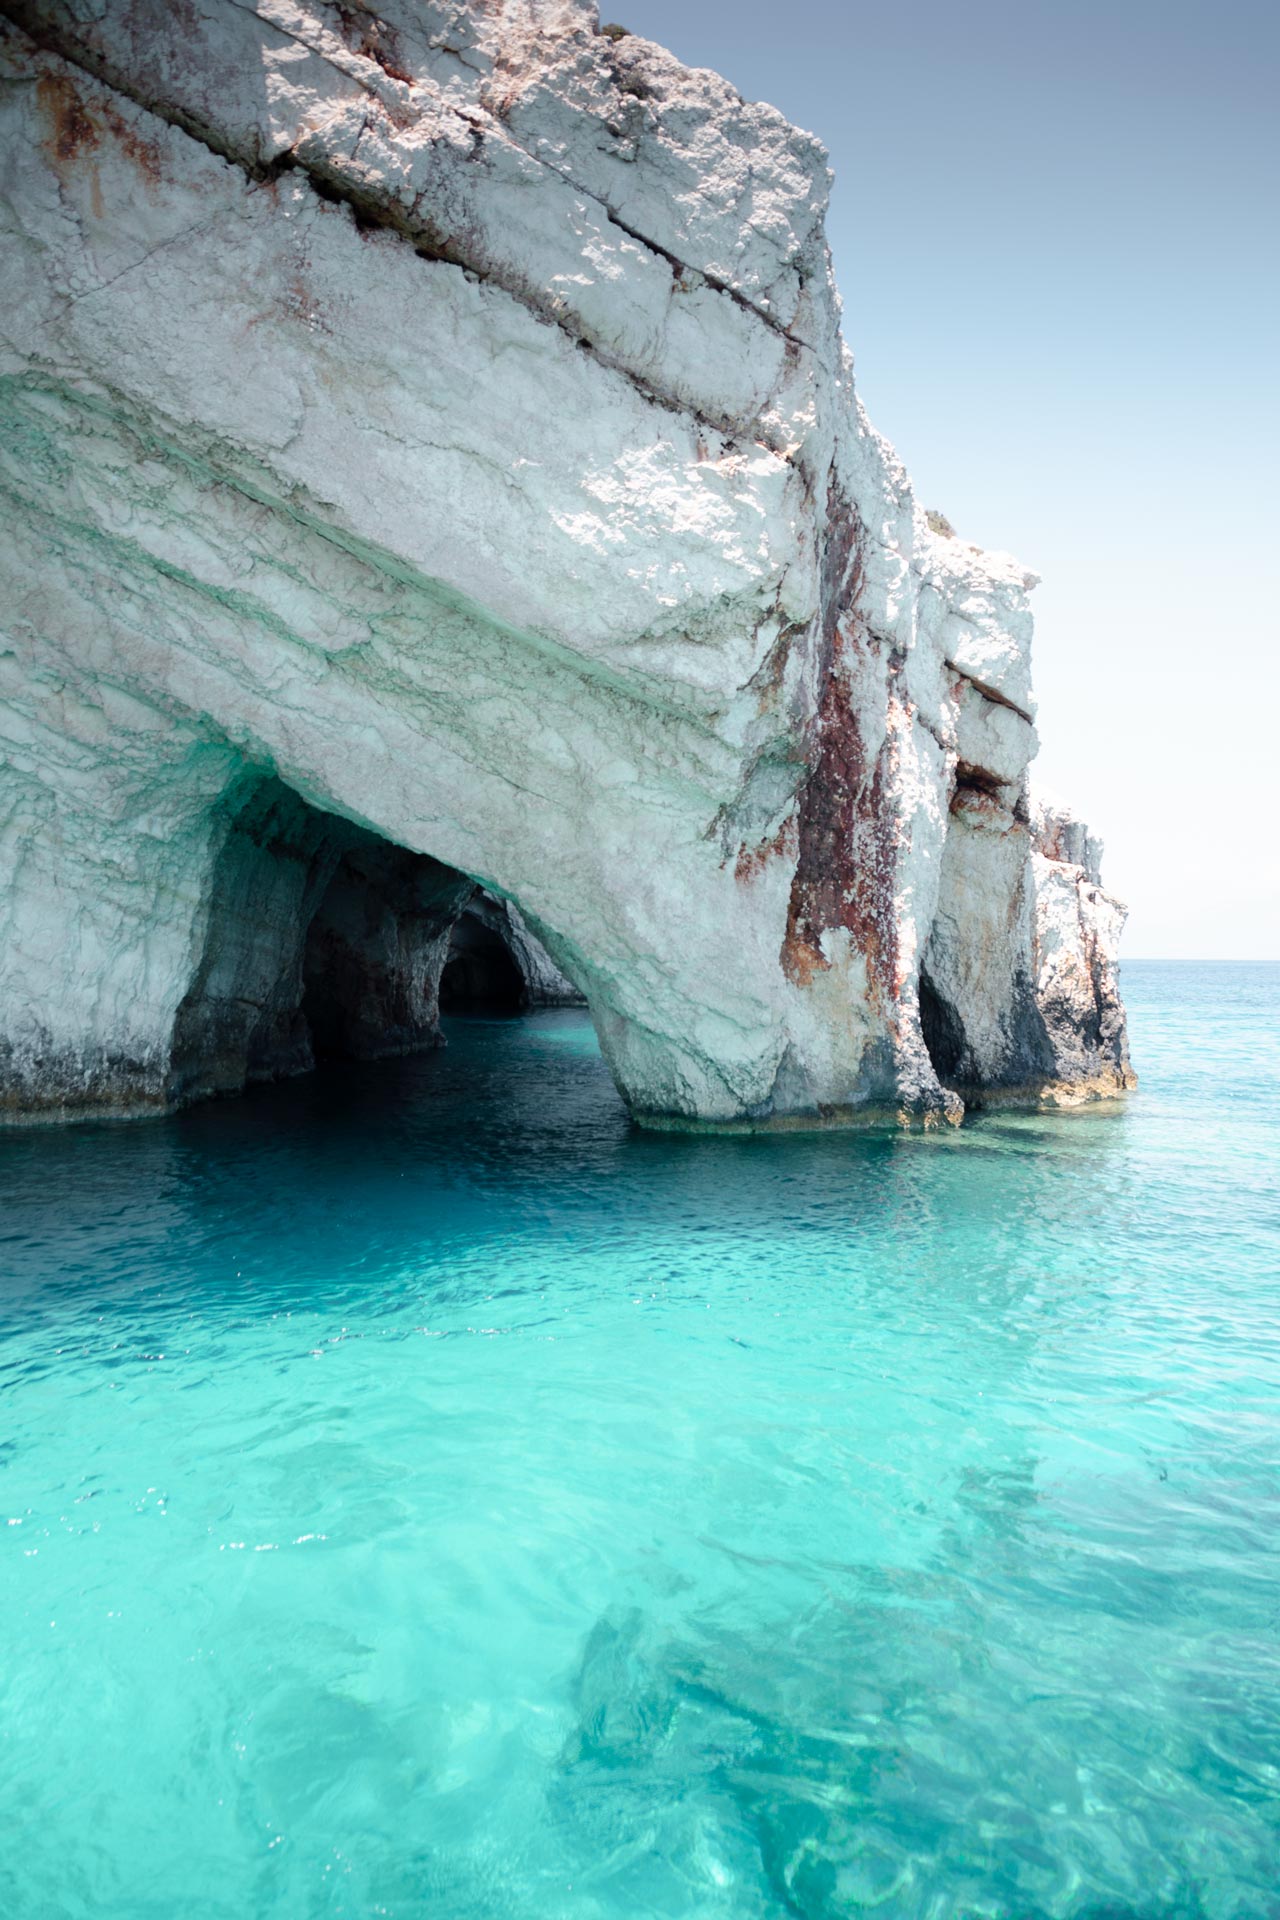 Once at the caves, you’ll have a unique water-level appreciation of the iridescent blue colours created by the play of sunlight on the cliff-face and the sea